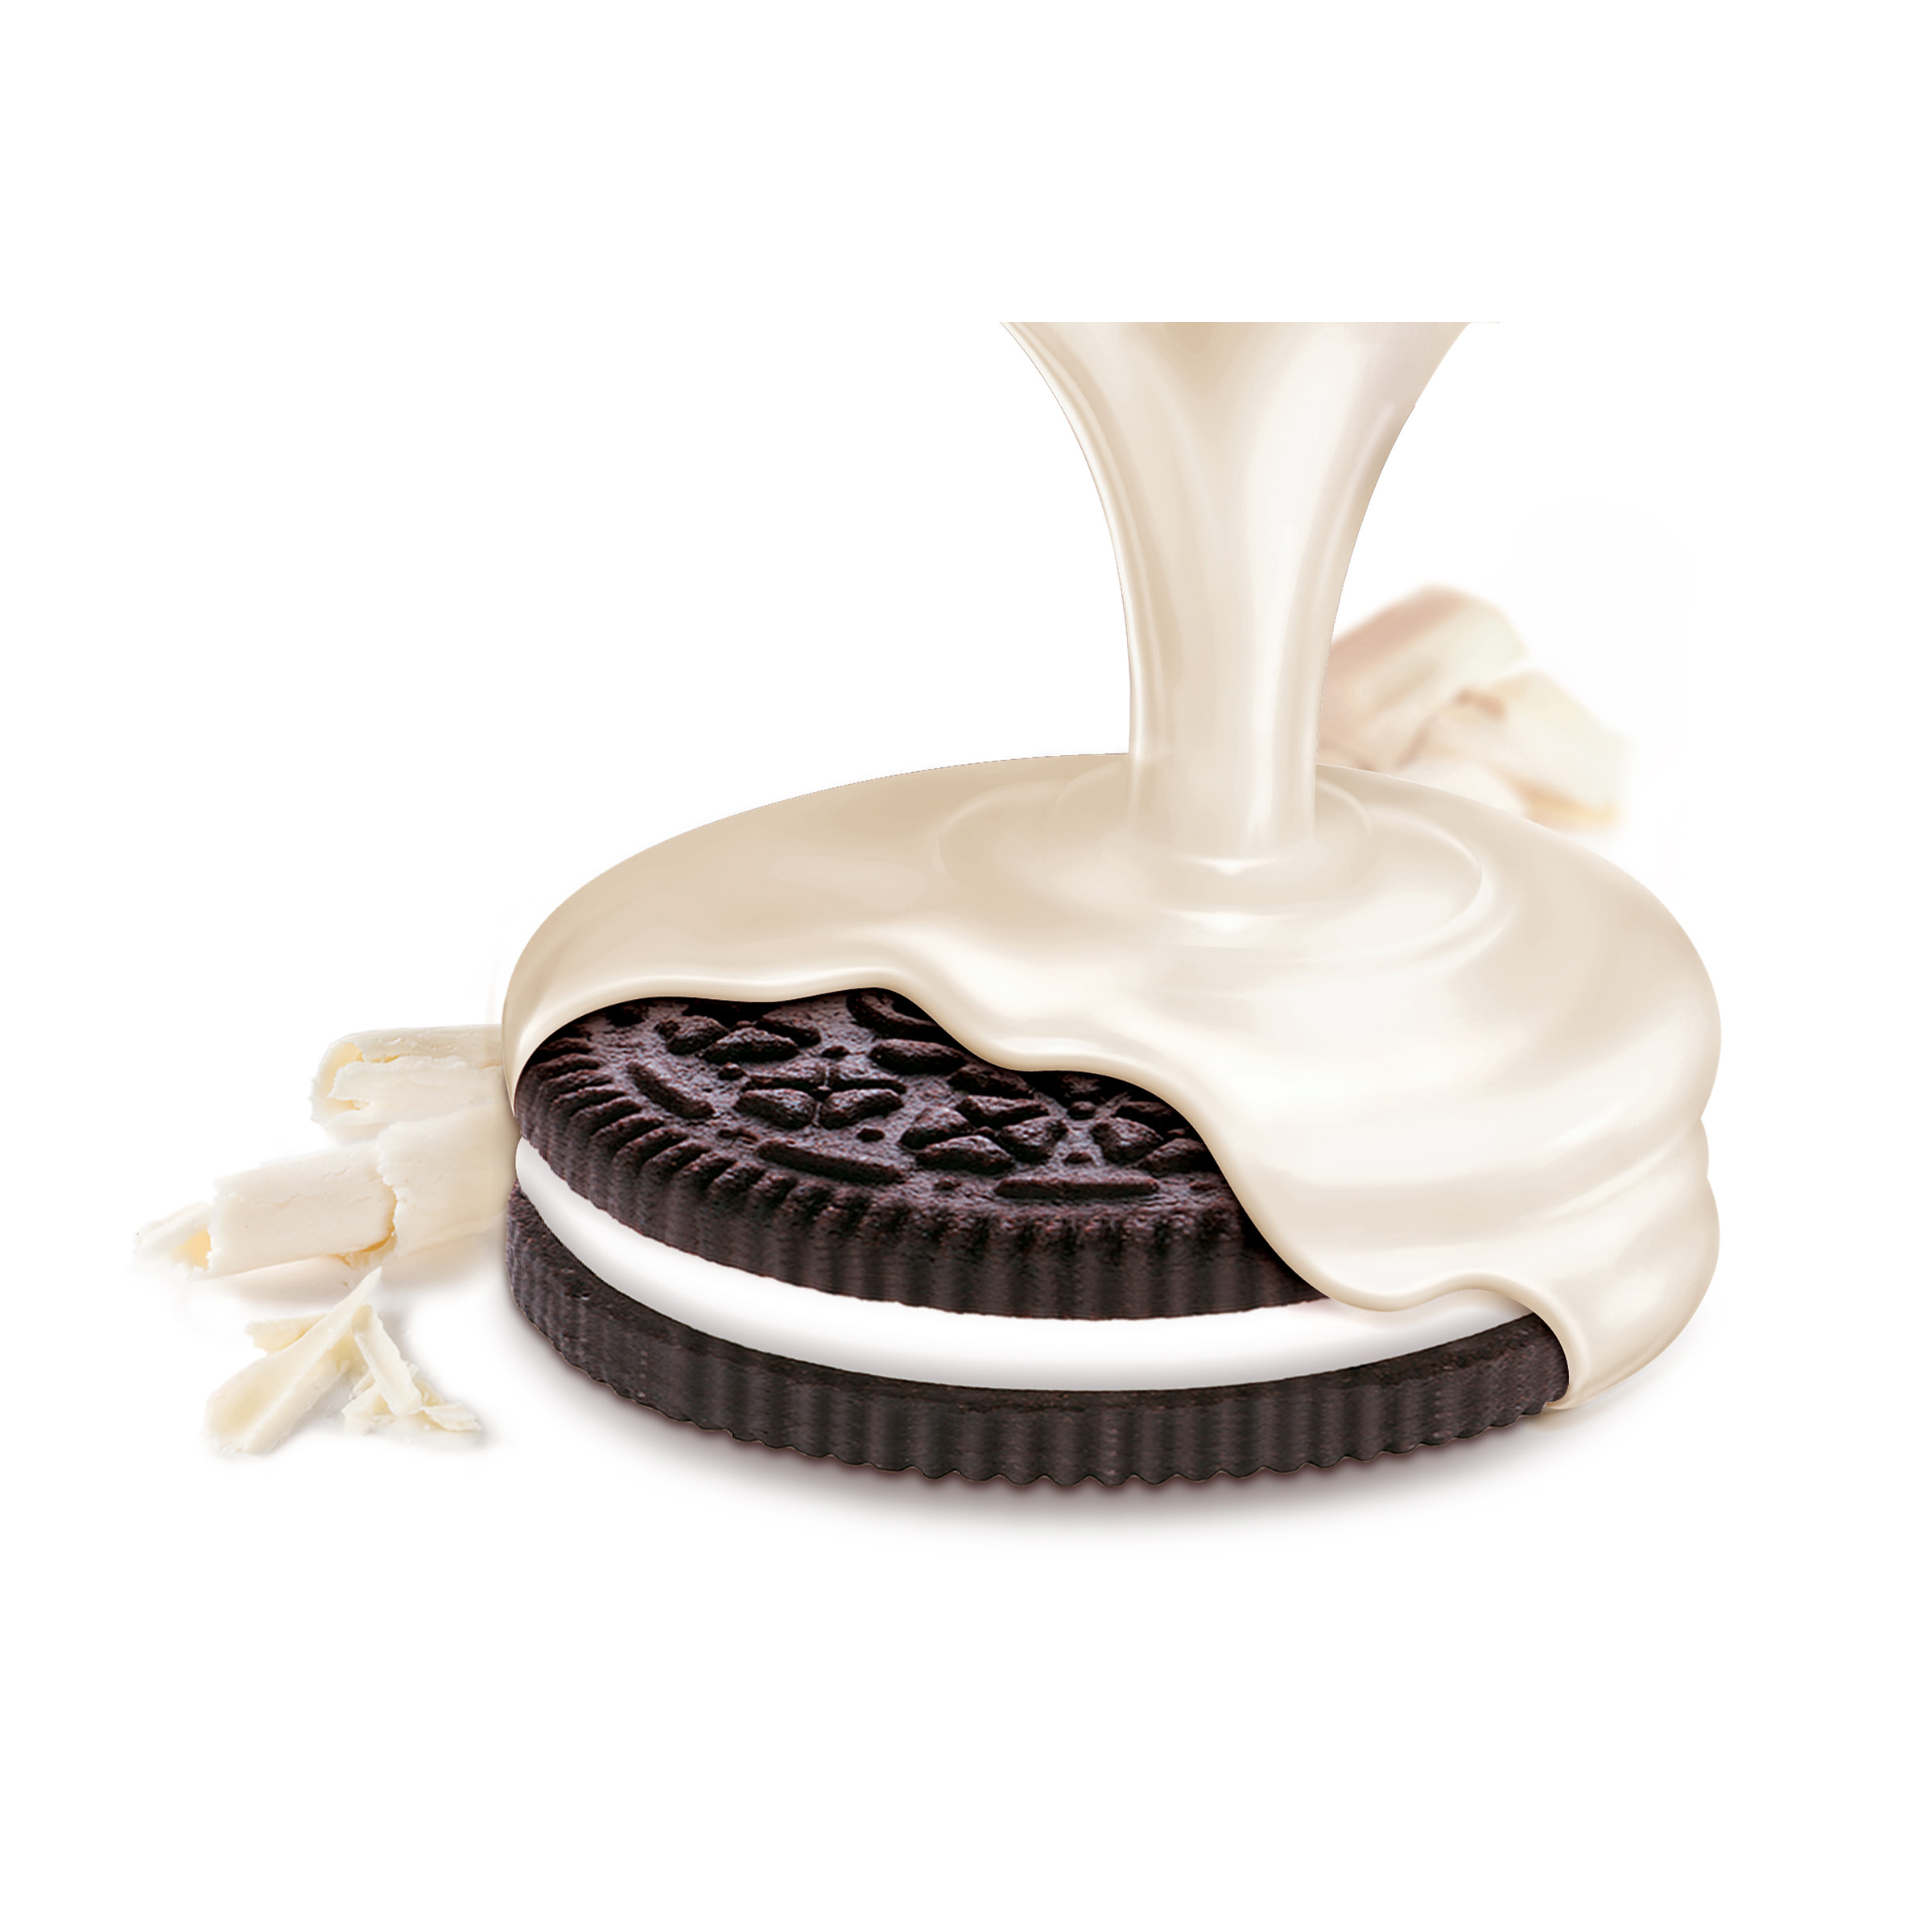 Oreo Fudge Covered & White Fudge Covered Sandwich Holiday Cookies, 1.03 Lb Holiday Tin (24 Cookies) - image 3 of 9